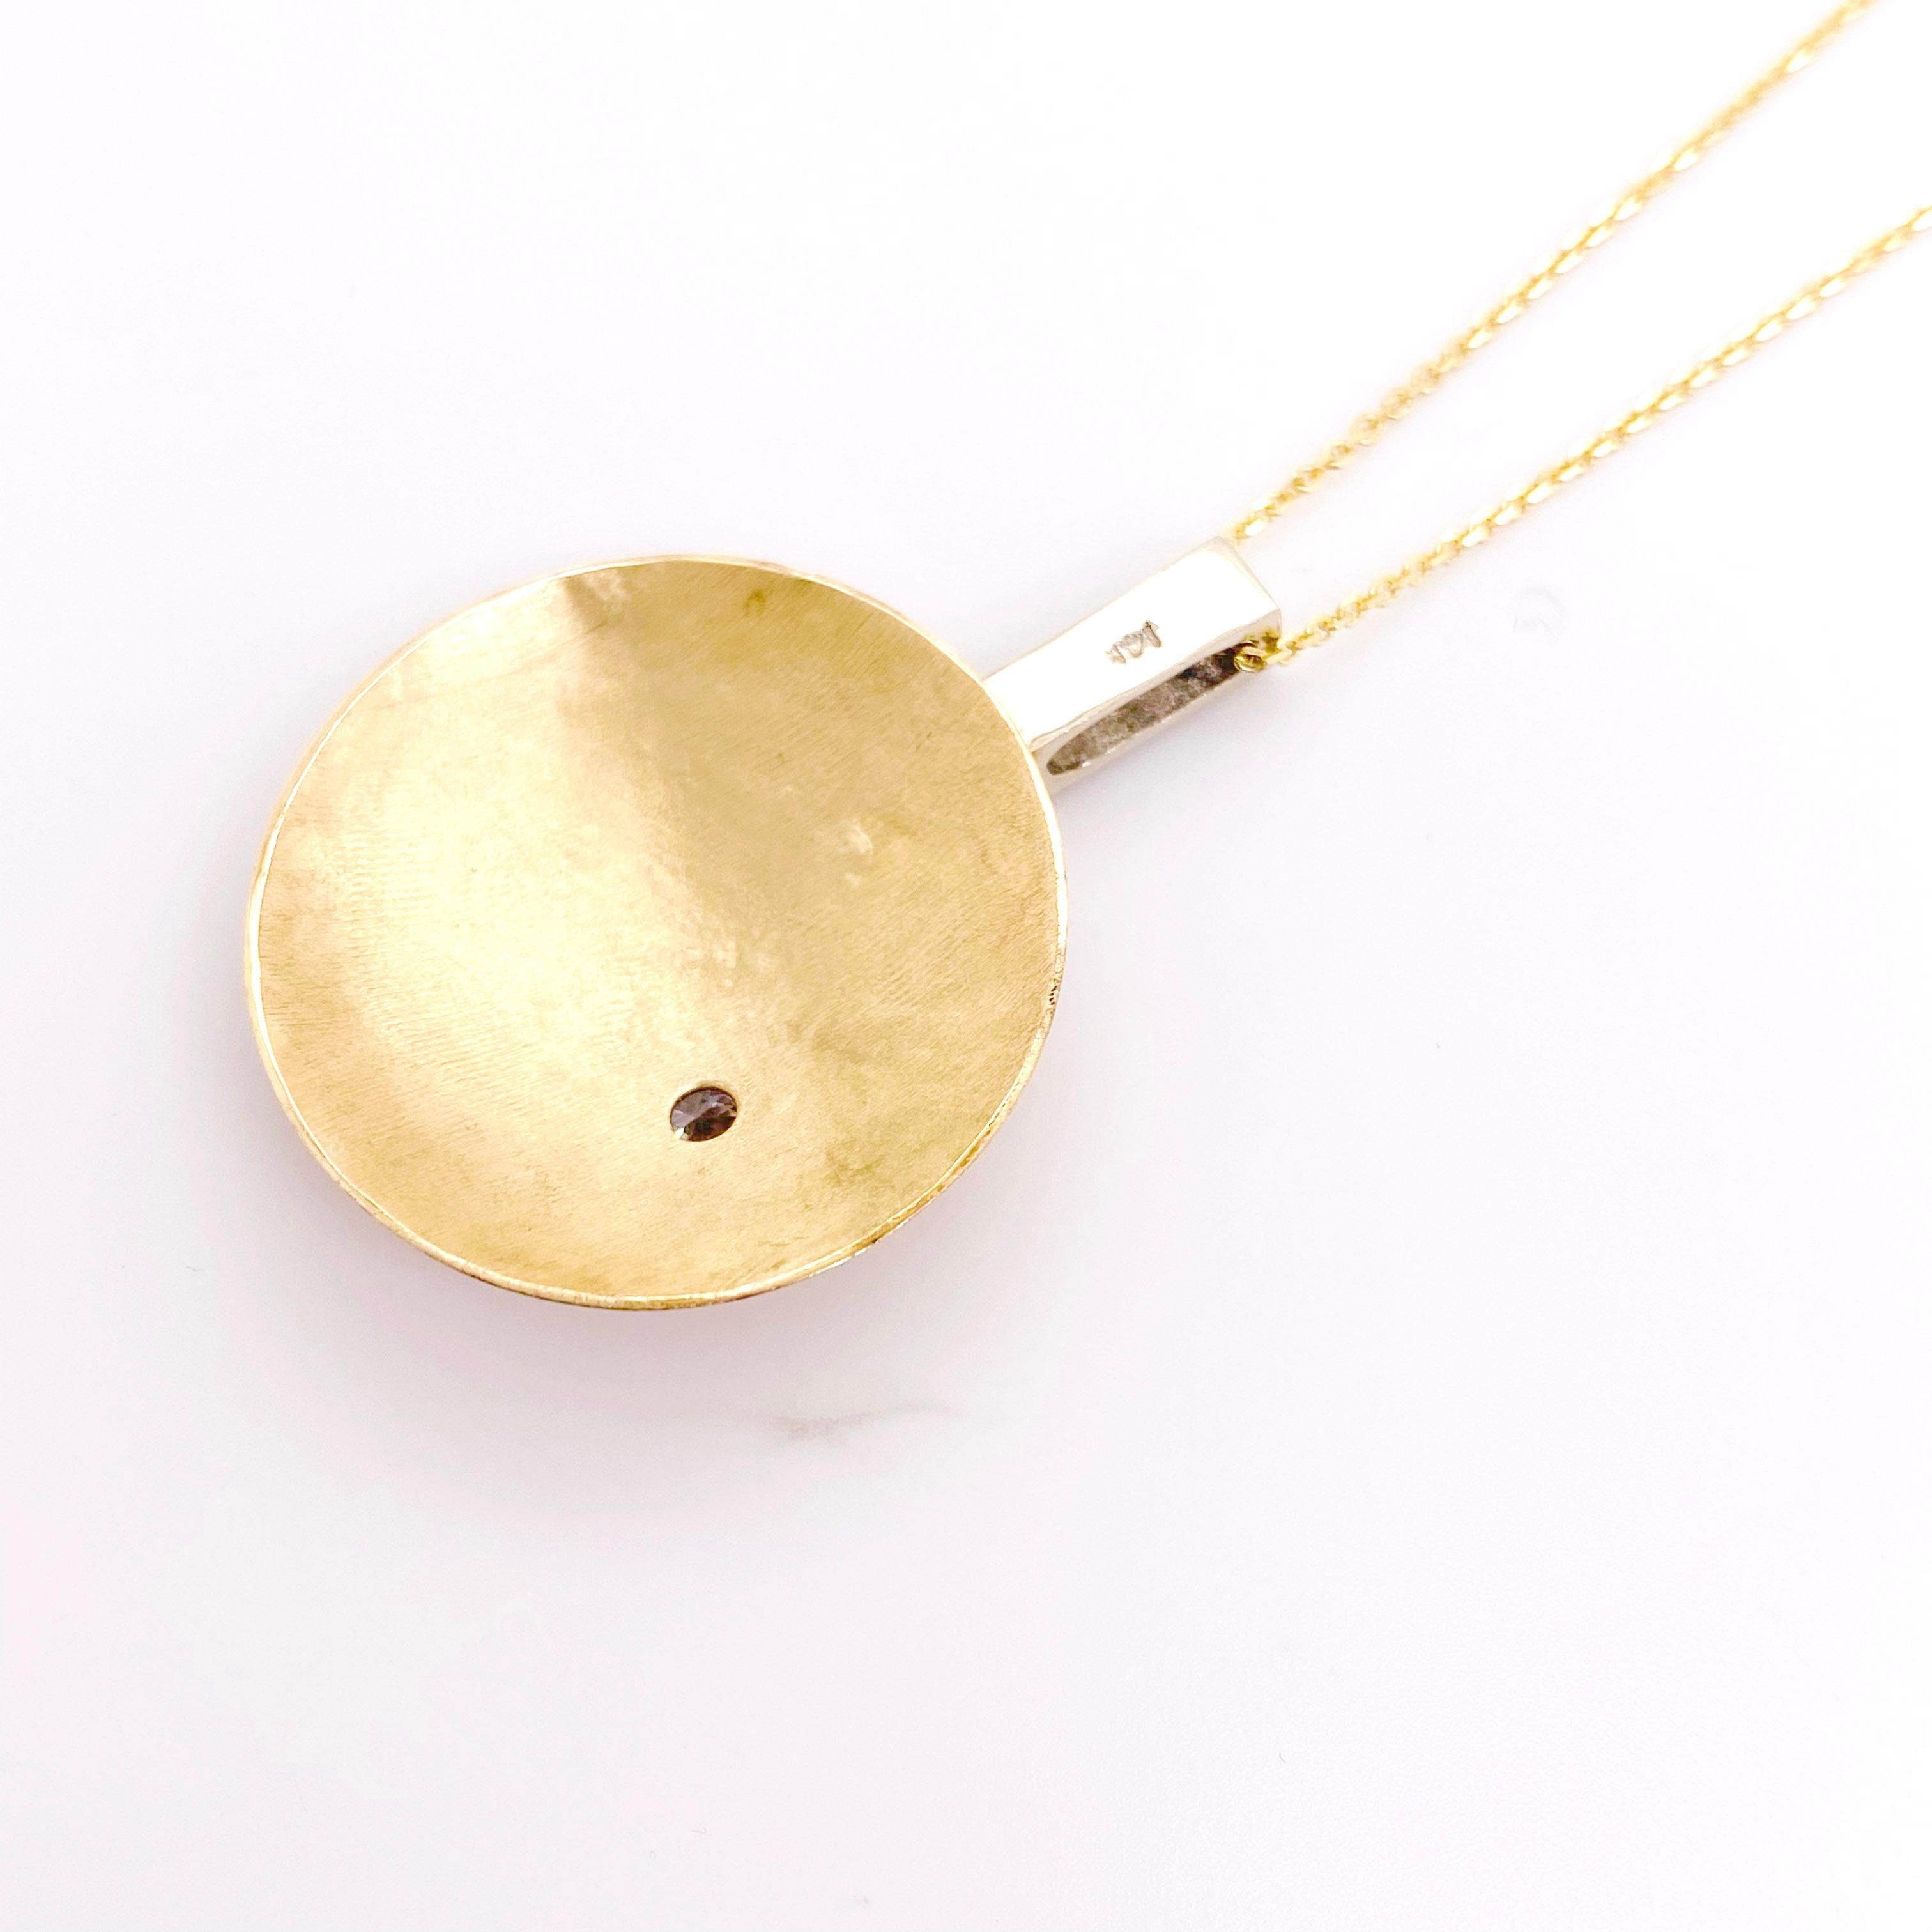 Contemporary Gold Disk Diamond Pendant Necklace, Yellow Gold, Hammered Circle Pendant For Sale